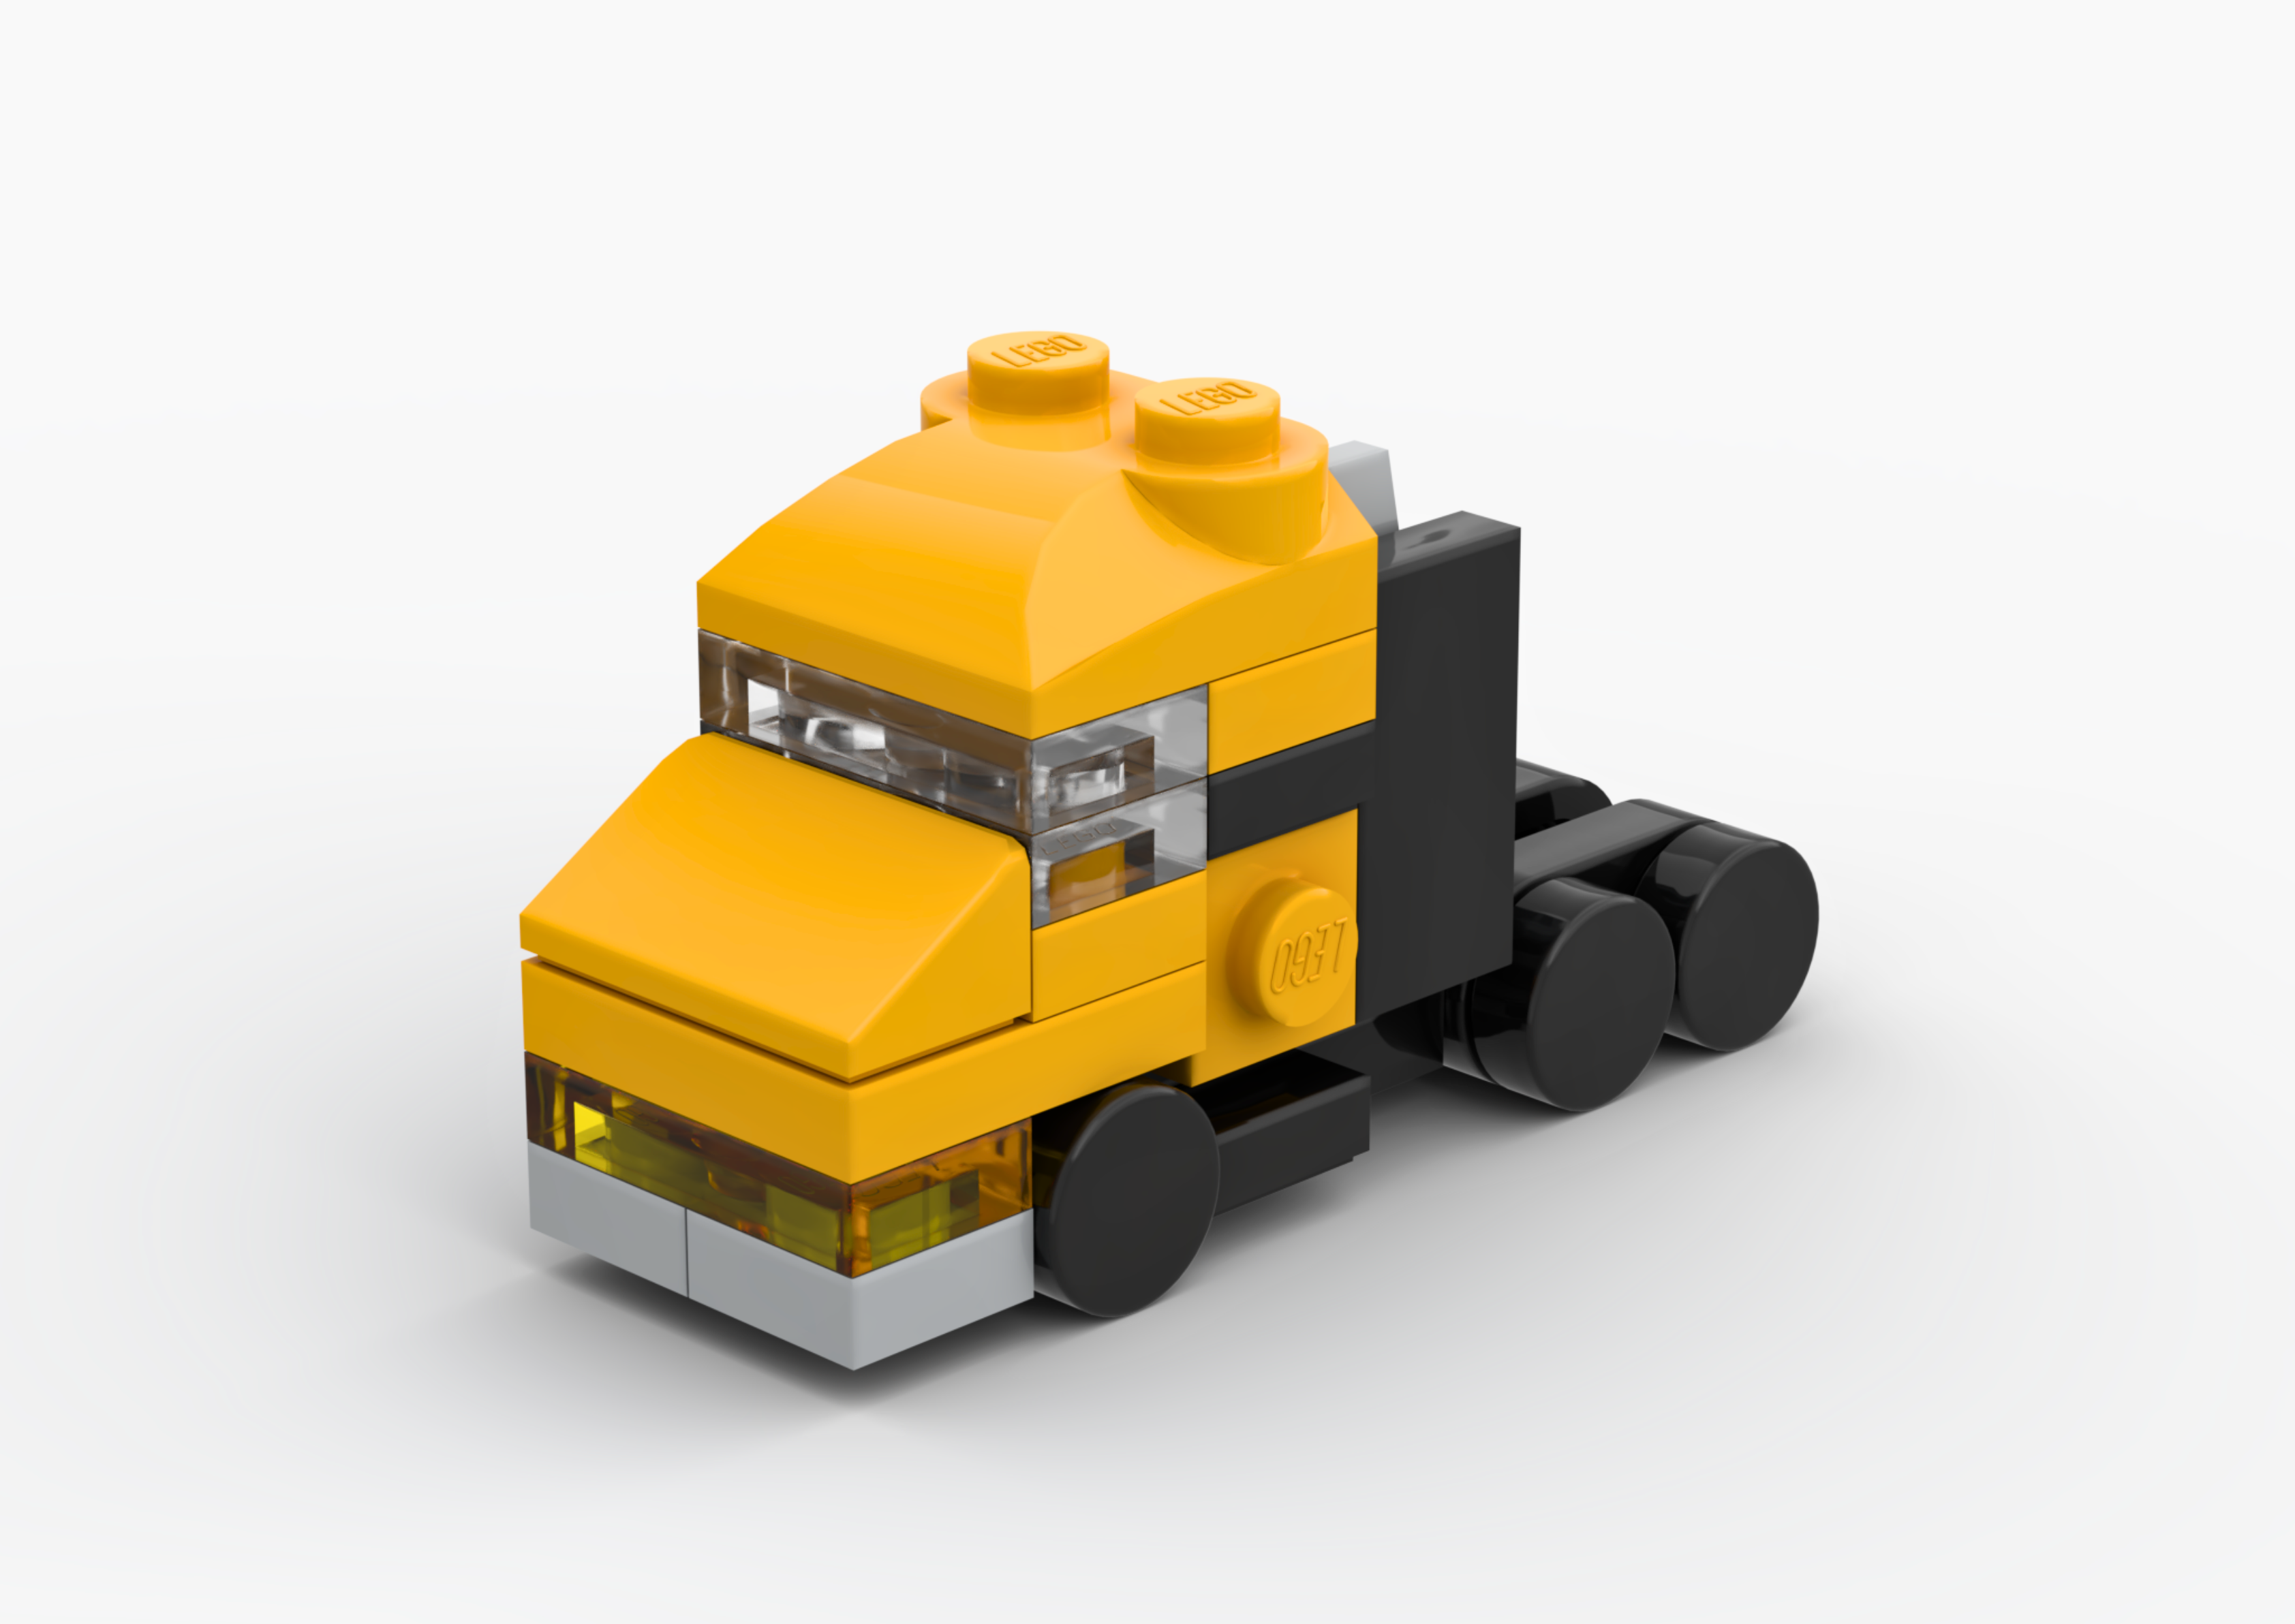 3D rendered image of the LEGO Micro Scania T-Cab Truck MOC.